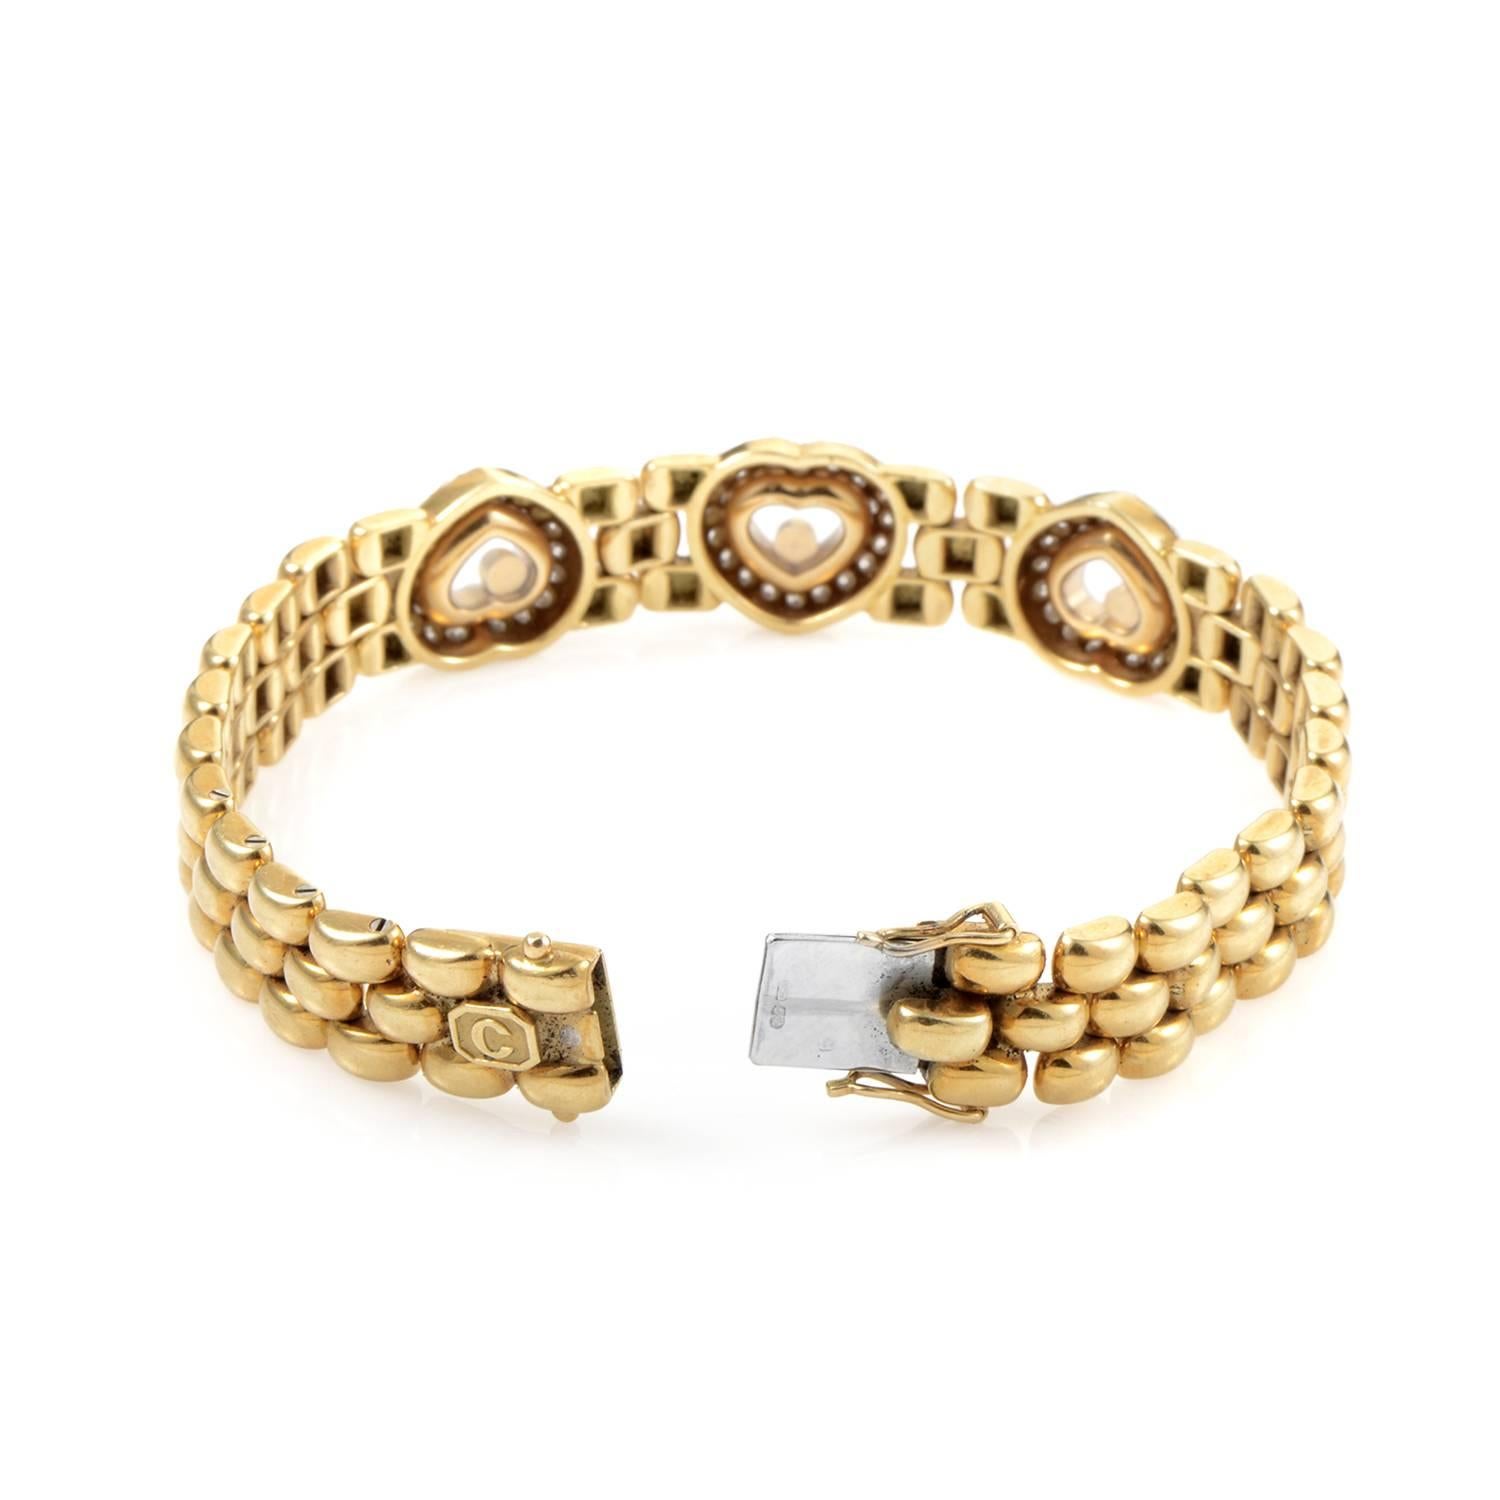 Producing an irresistible feel of traditional luxury through its thick links made of gleaming 18K yellow gold, this charming bracelet from Chopard also features sparkling diamonds weighing in total approximately 2.00 carats arranged in three lovely